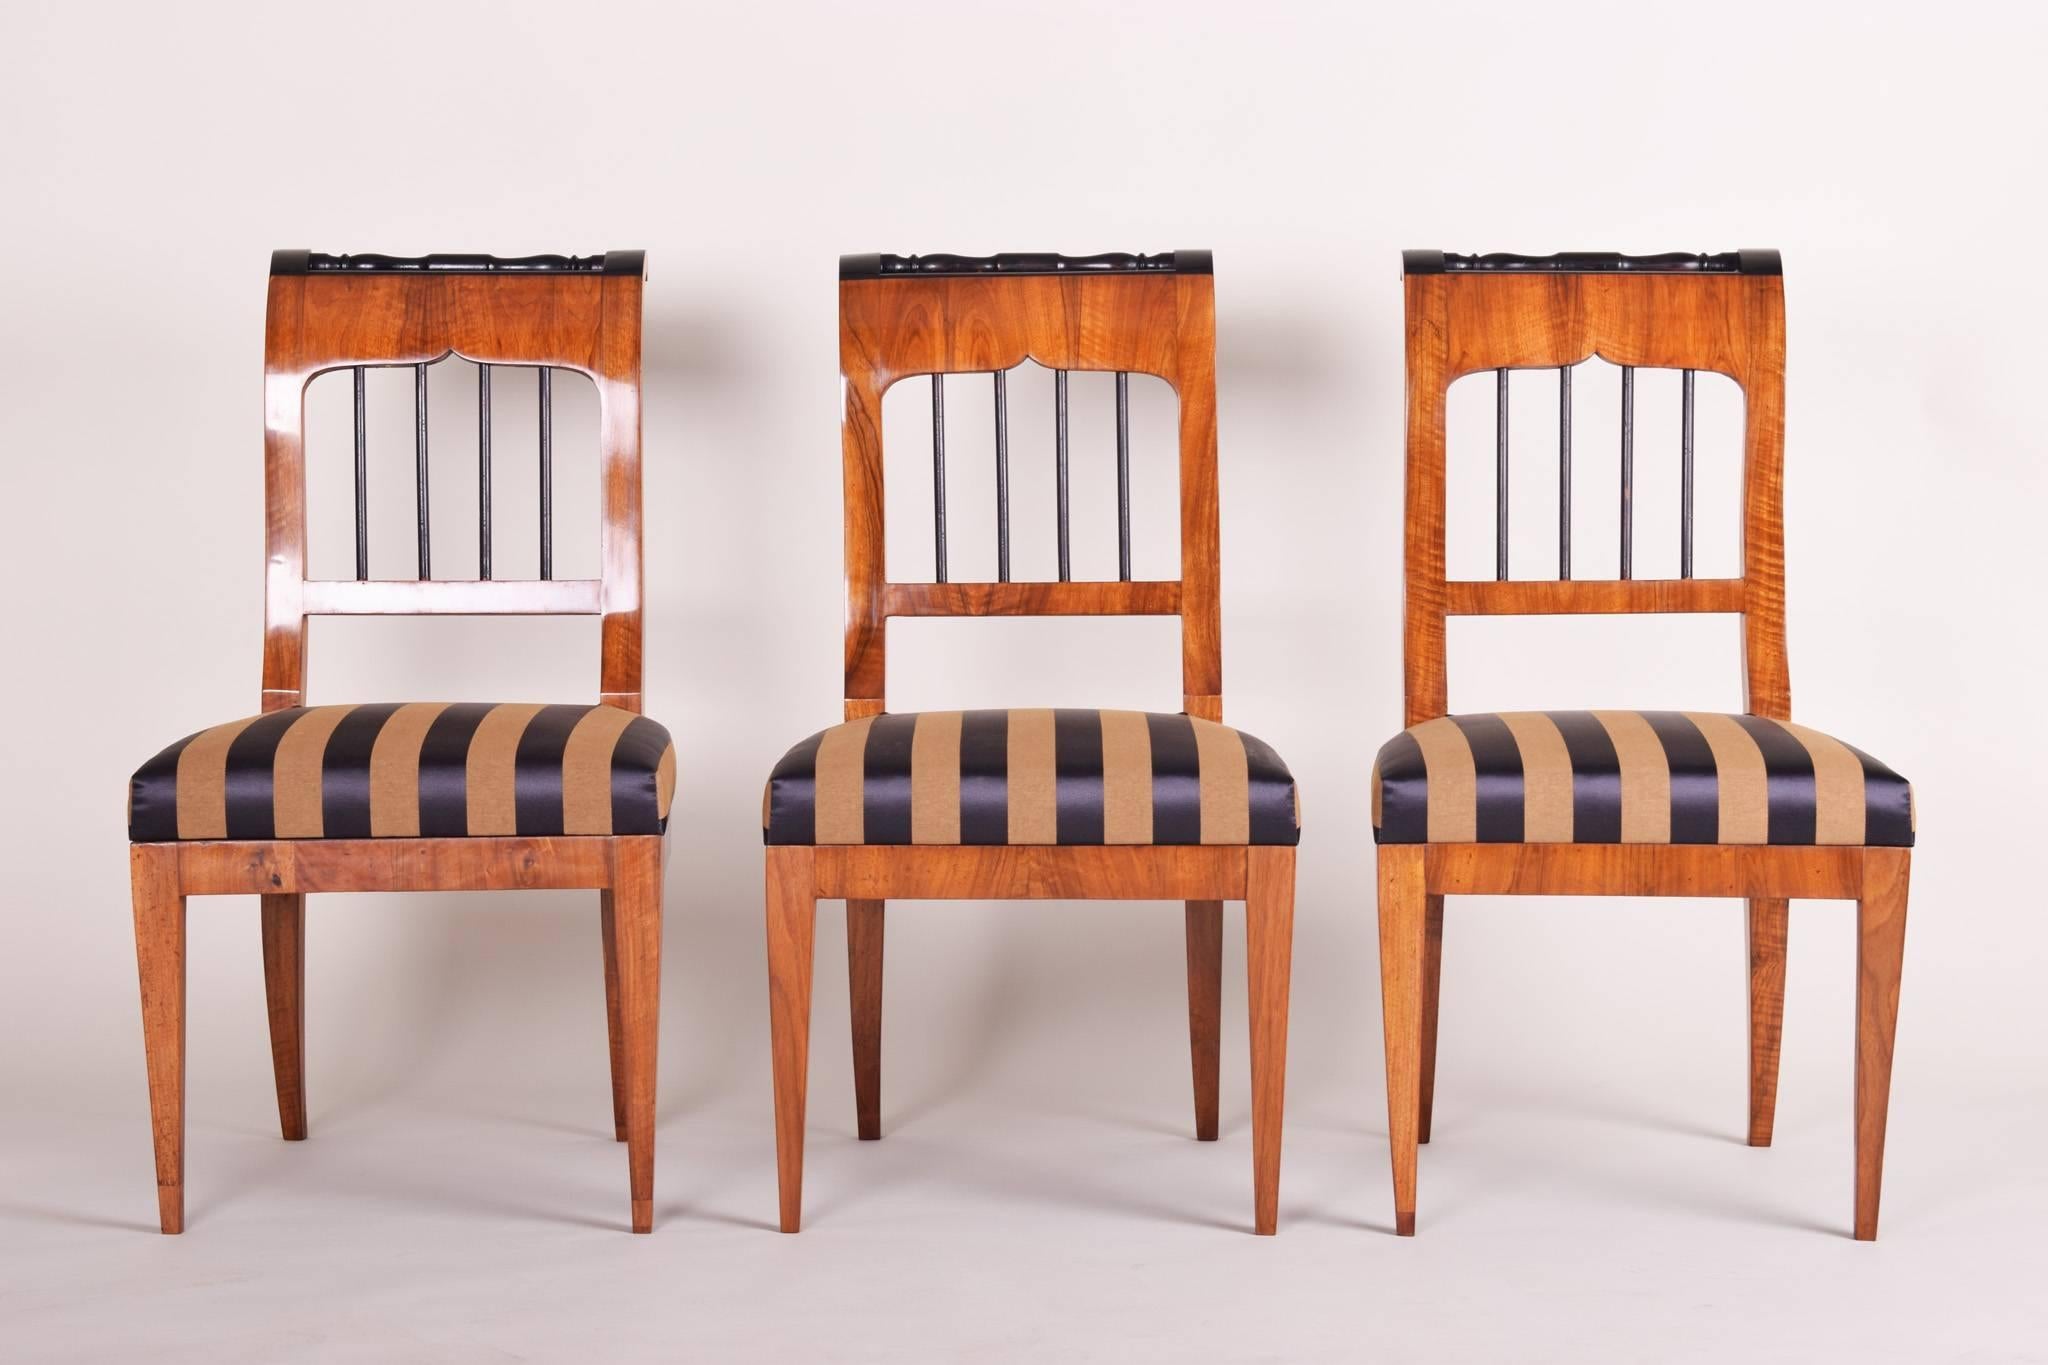 Shipping to any US port only for $290 USD

Set of Biedermeier chairs, three pieces.
Completely restored, new fabric and upholstery included.
Source: Austria, Wien
Shellac-polish.

We guarantee safe a the cheapest air transport from Europe to the